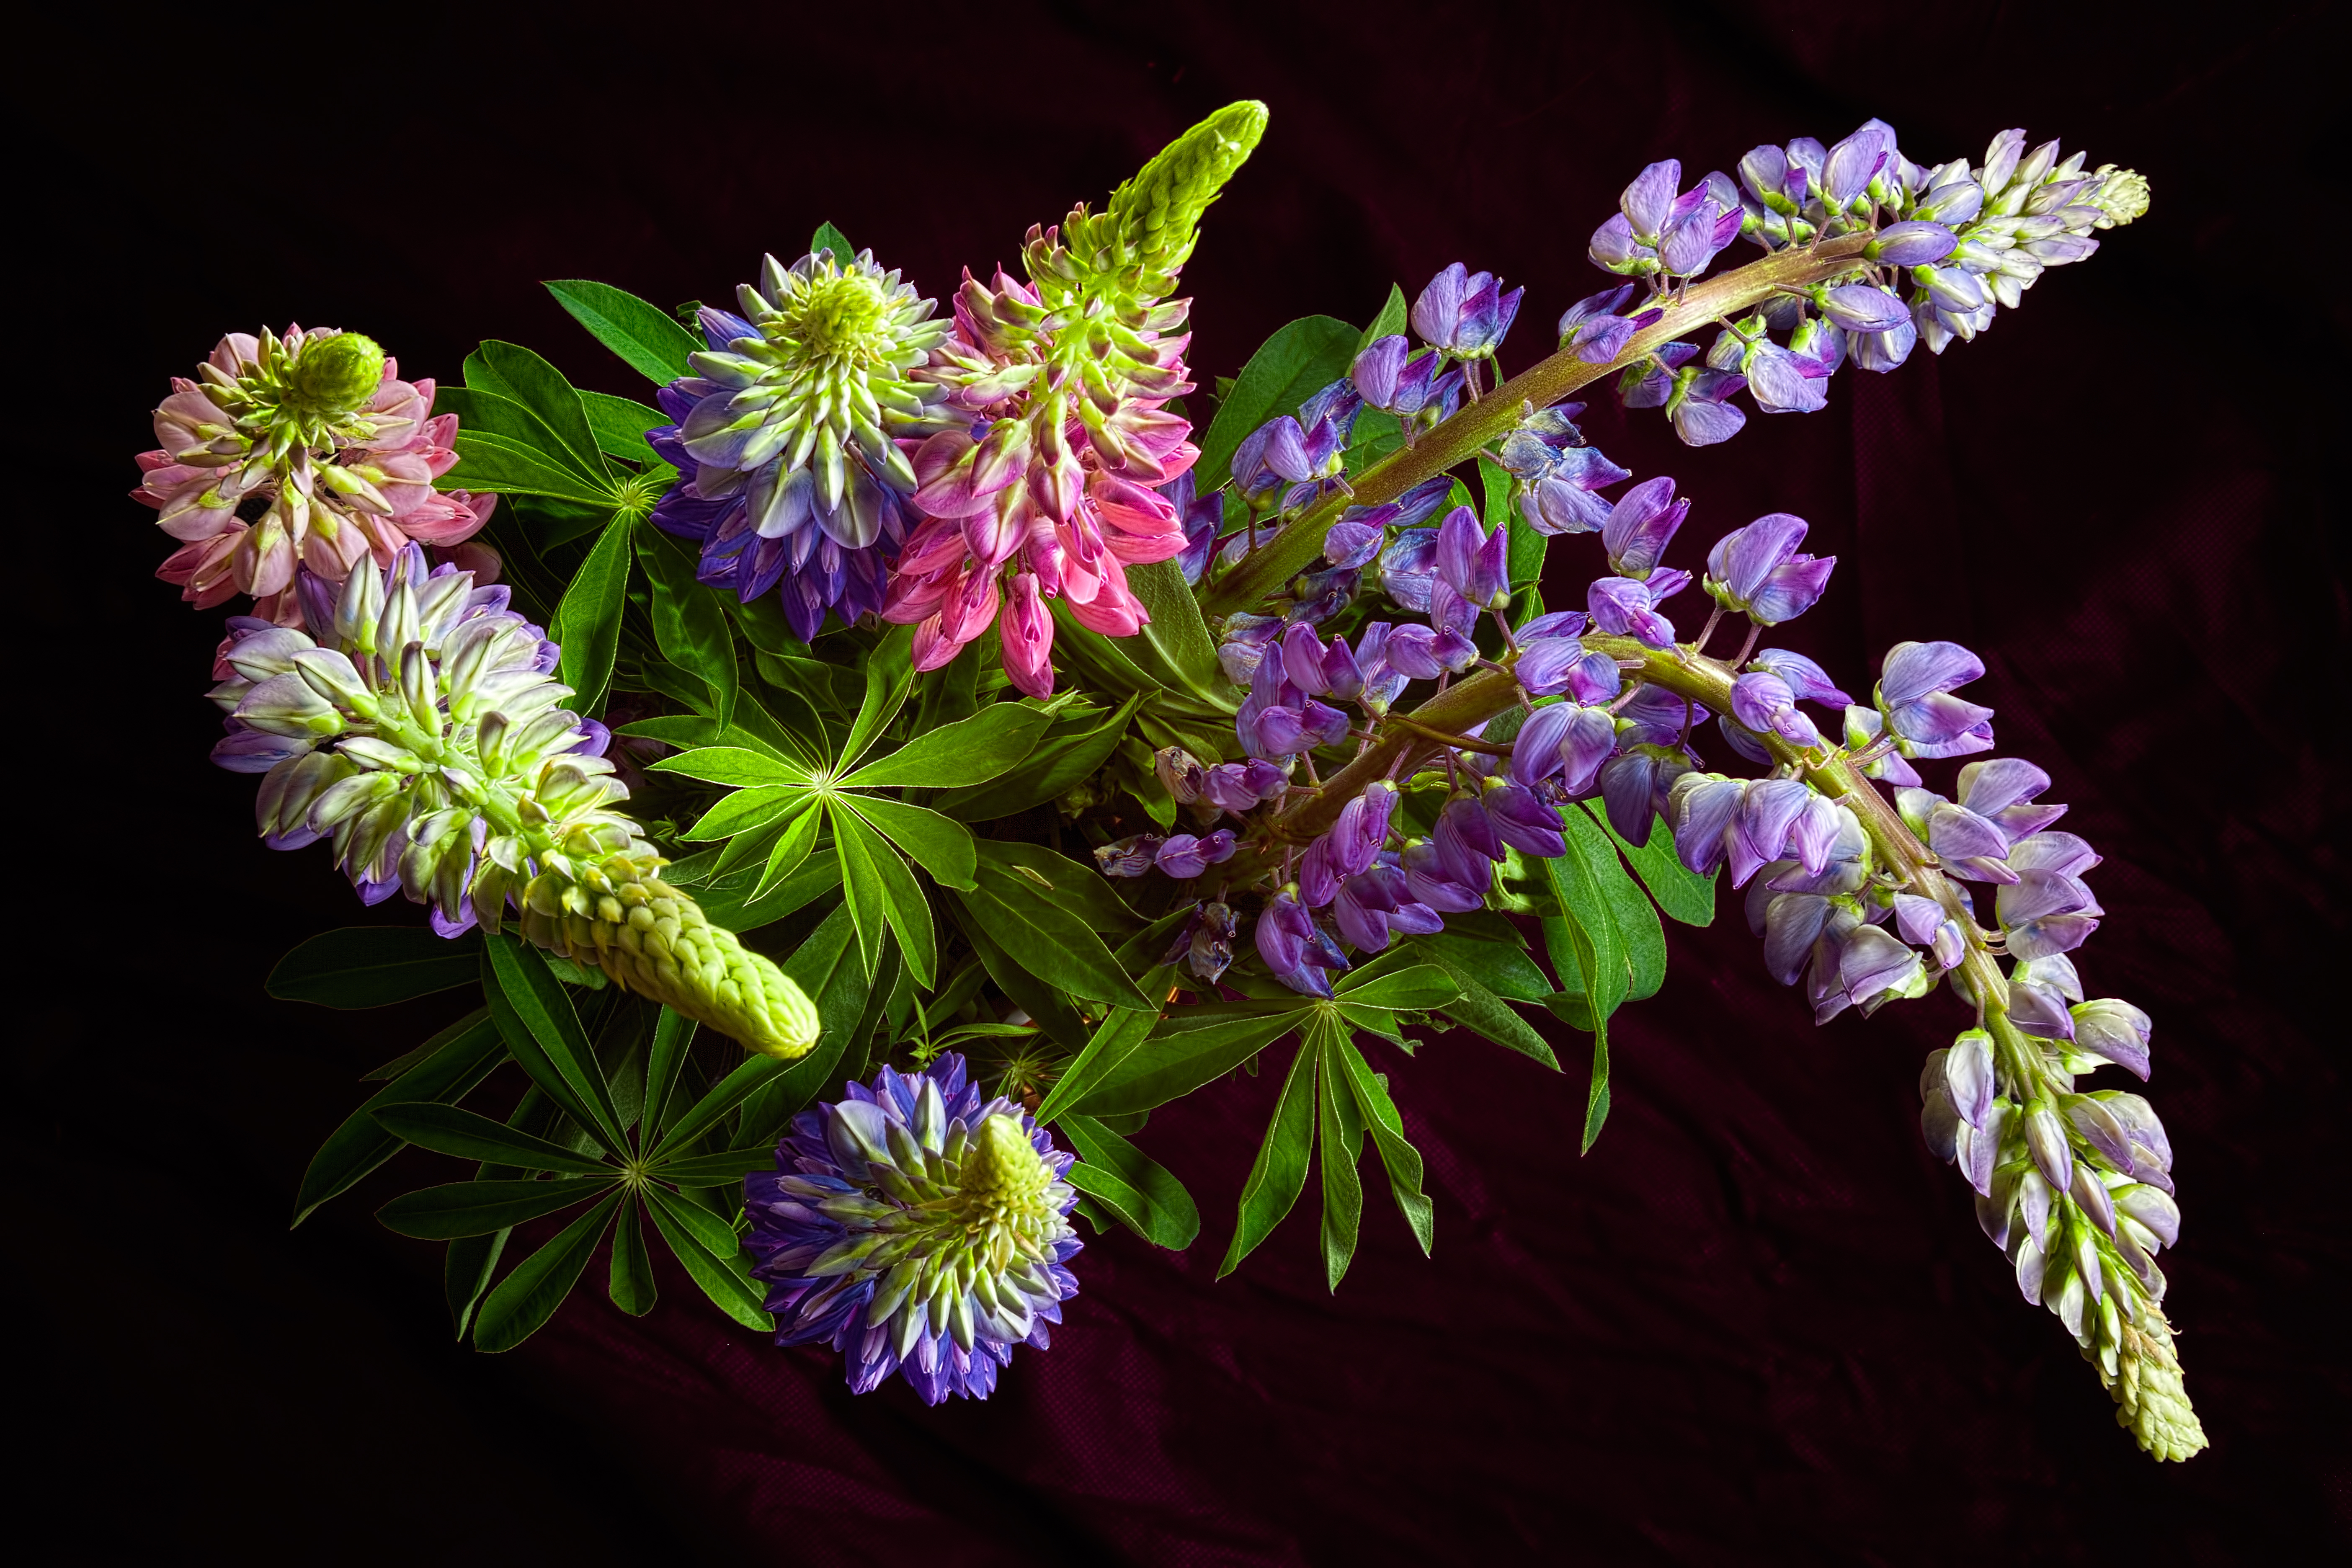 Wallpapers bouquet Lupin flora on the desktop